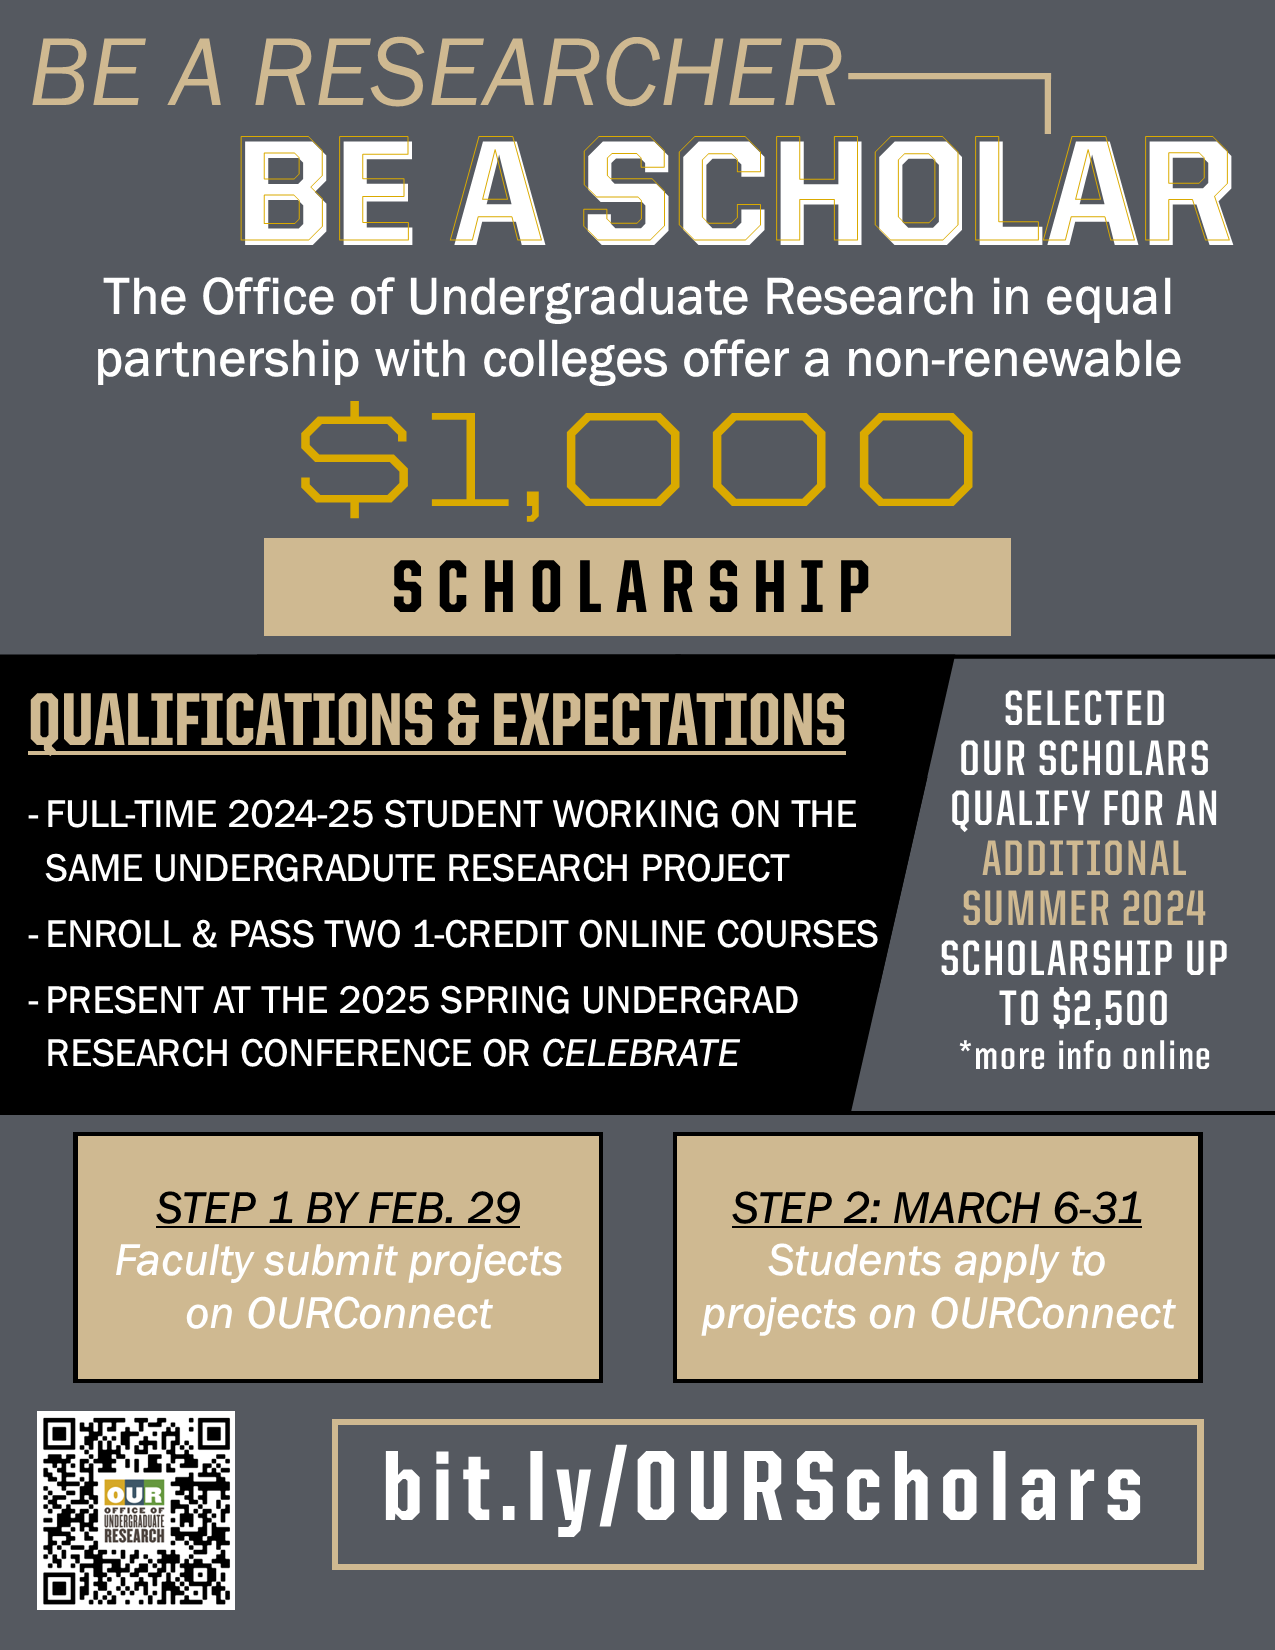 Information about applying to be an OUR Scholar. Information on flier is repeated on website.